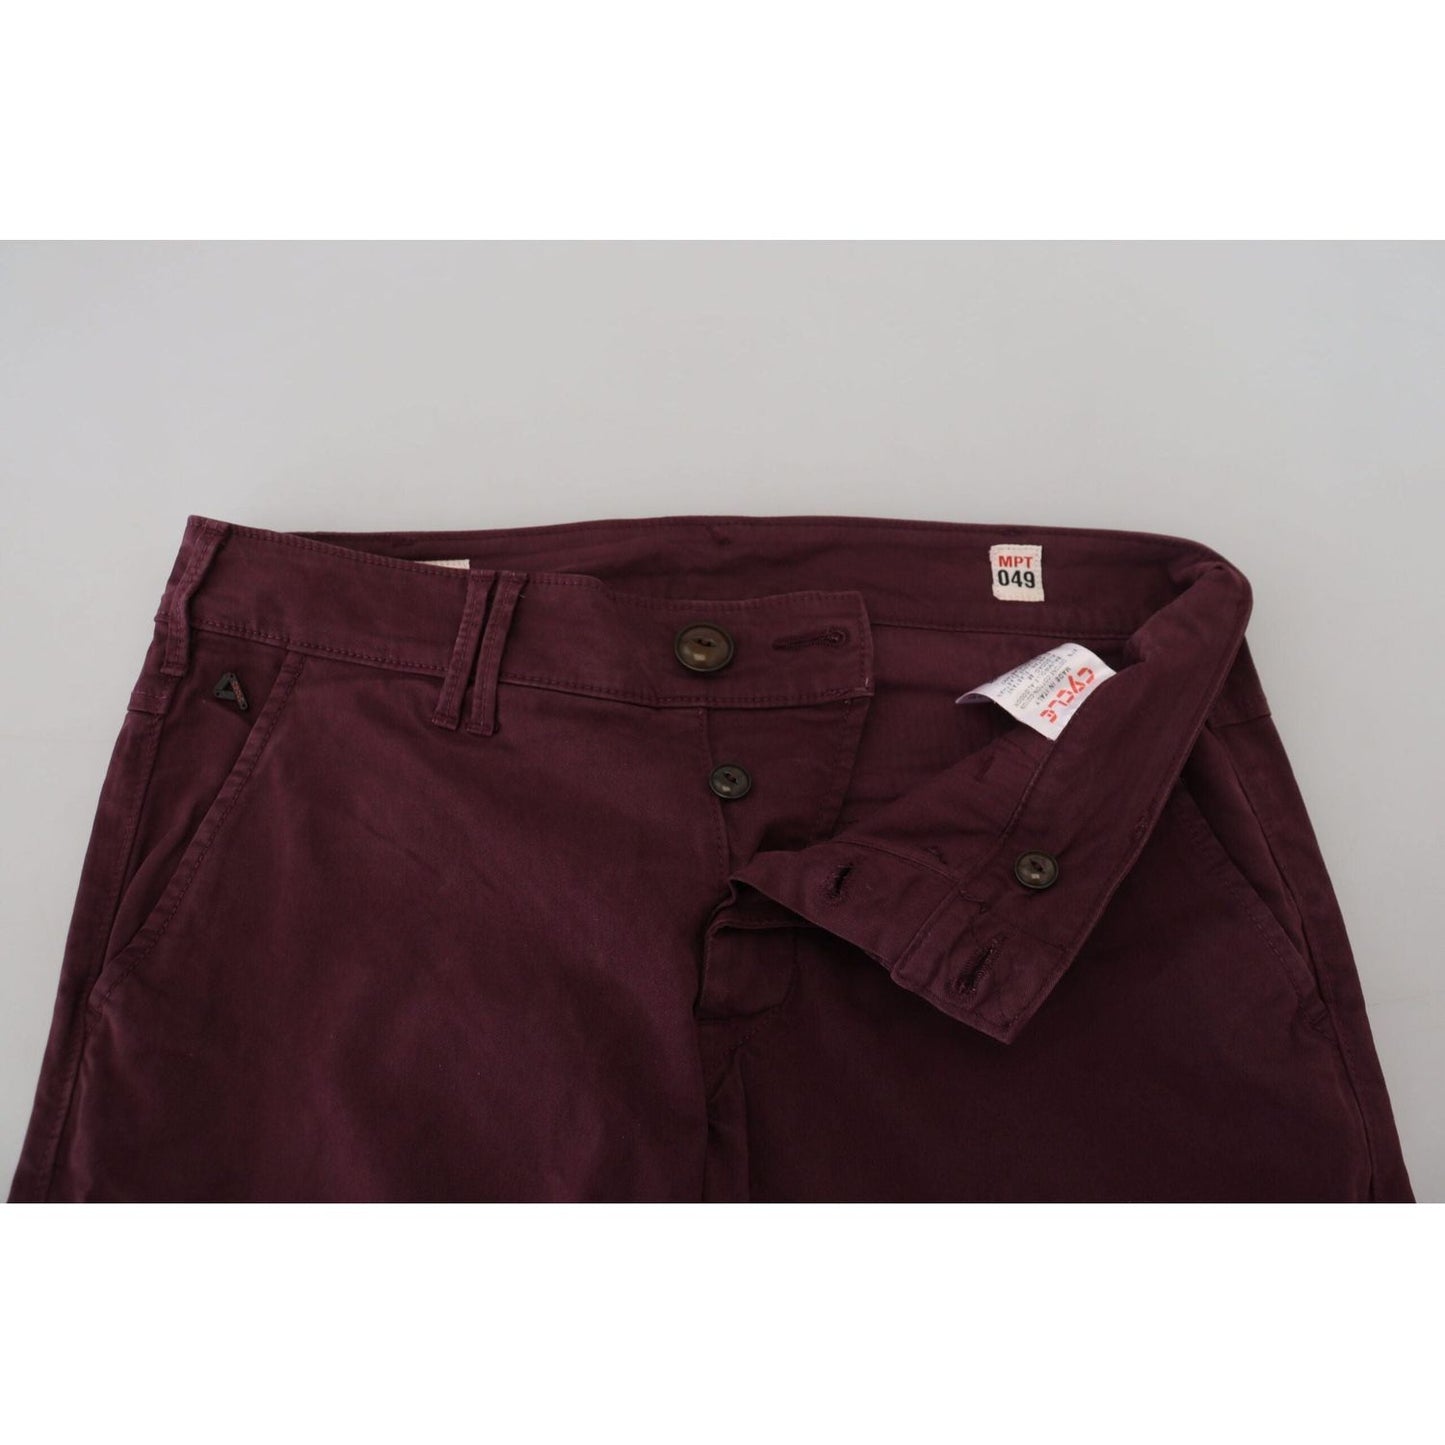 CYCLE Maroon Skinny Fit Cotton Pants maroon-cotton-stretch-skinny-casual-men-pants